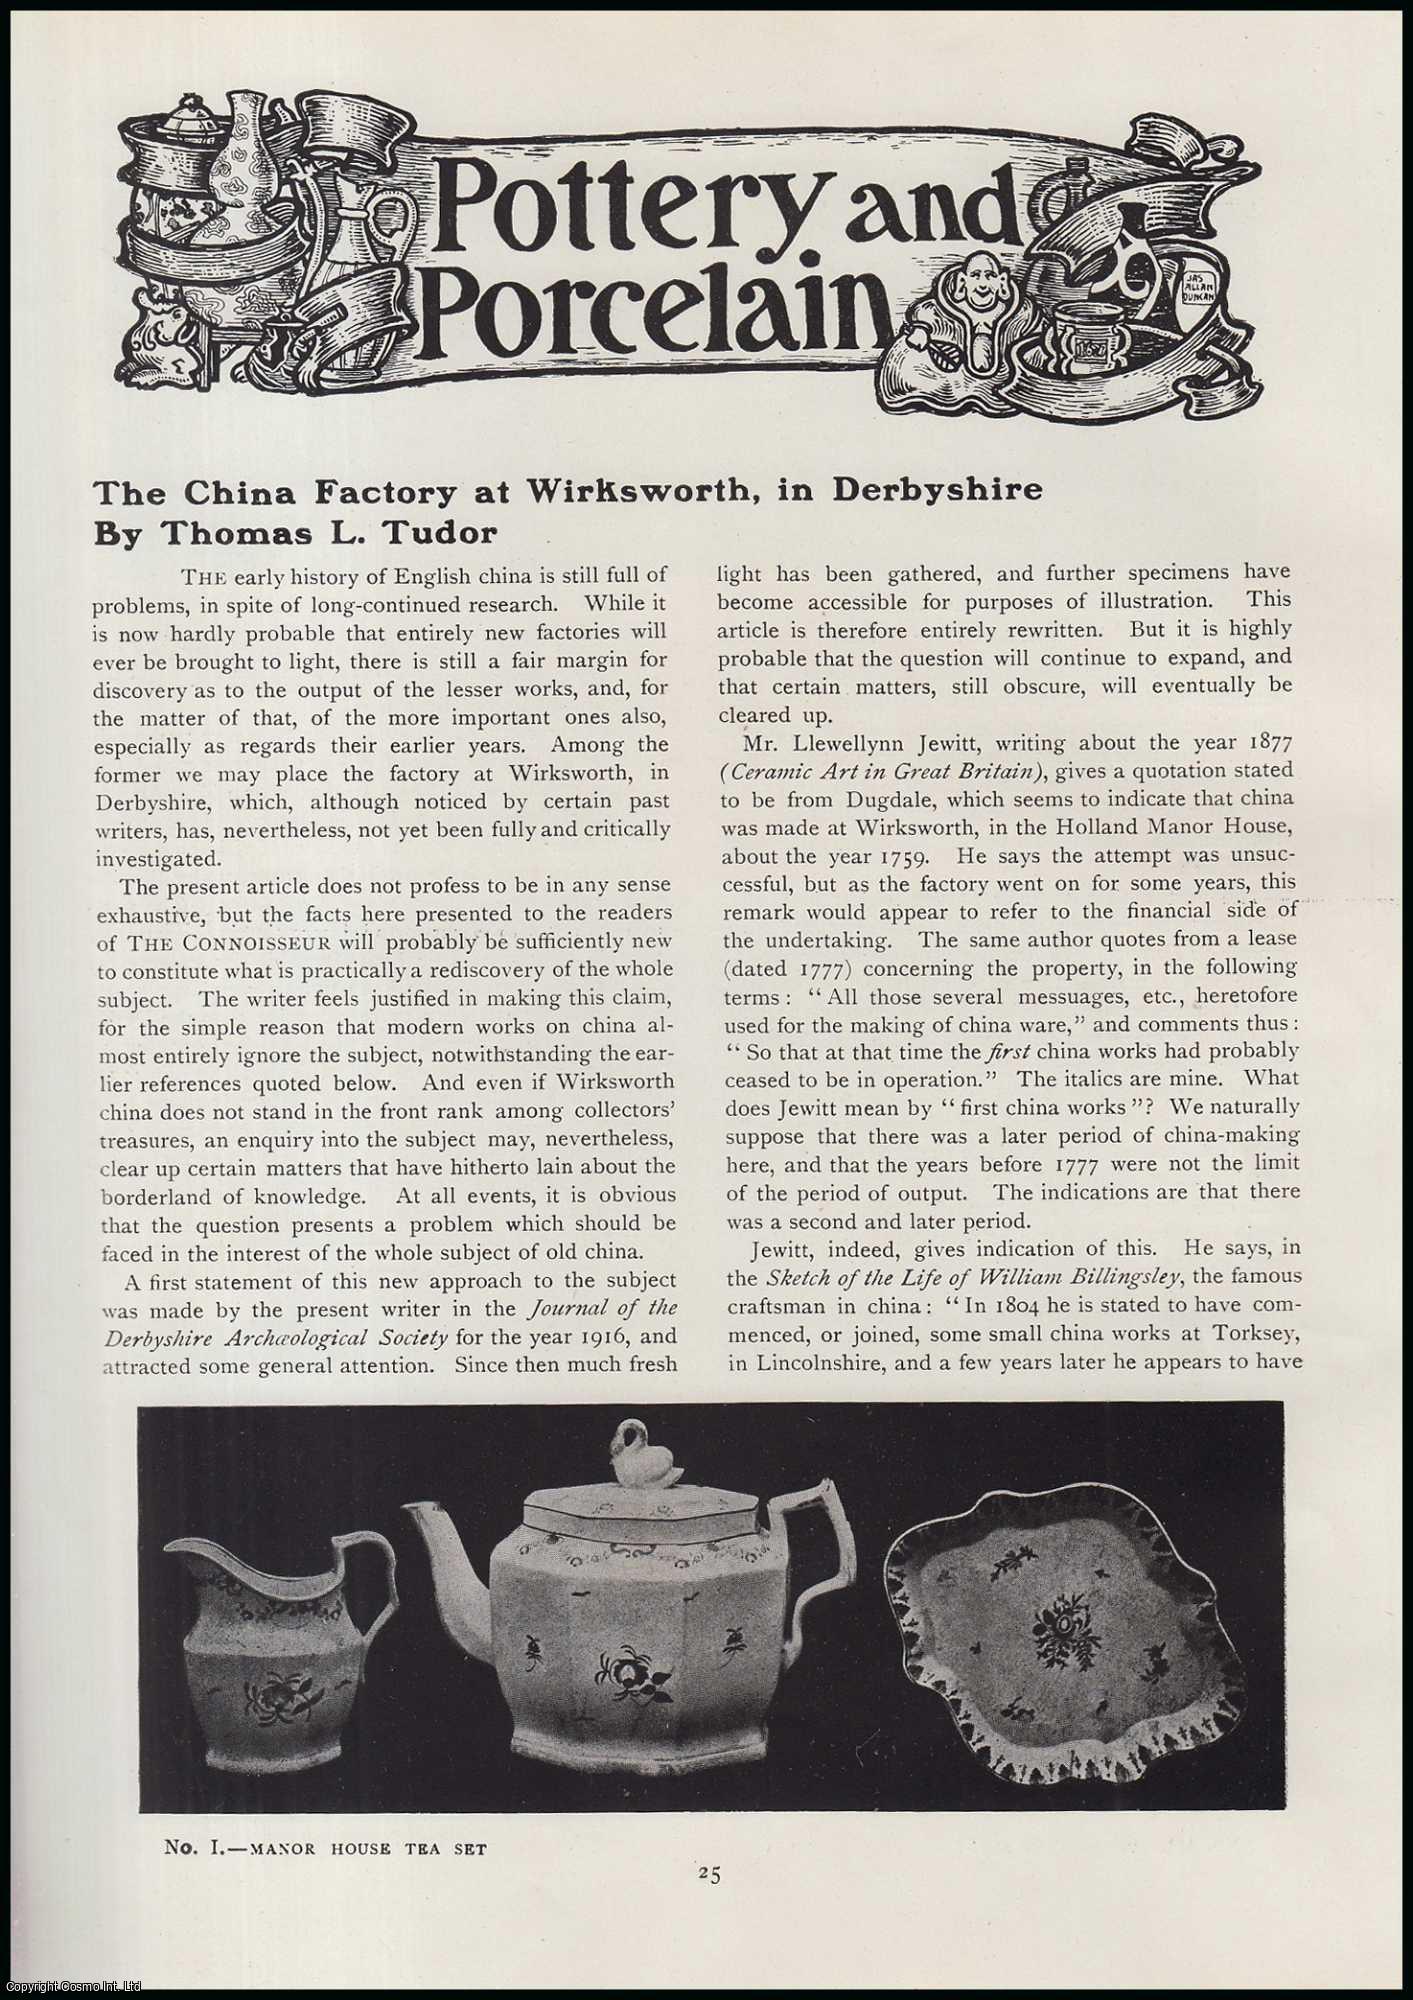 Thomas L. Tudor - The China Factory at Wirksworth, in Derbyshire. An original article from The Connoisseur, 1918.